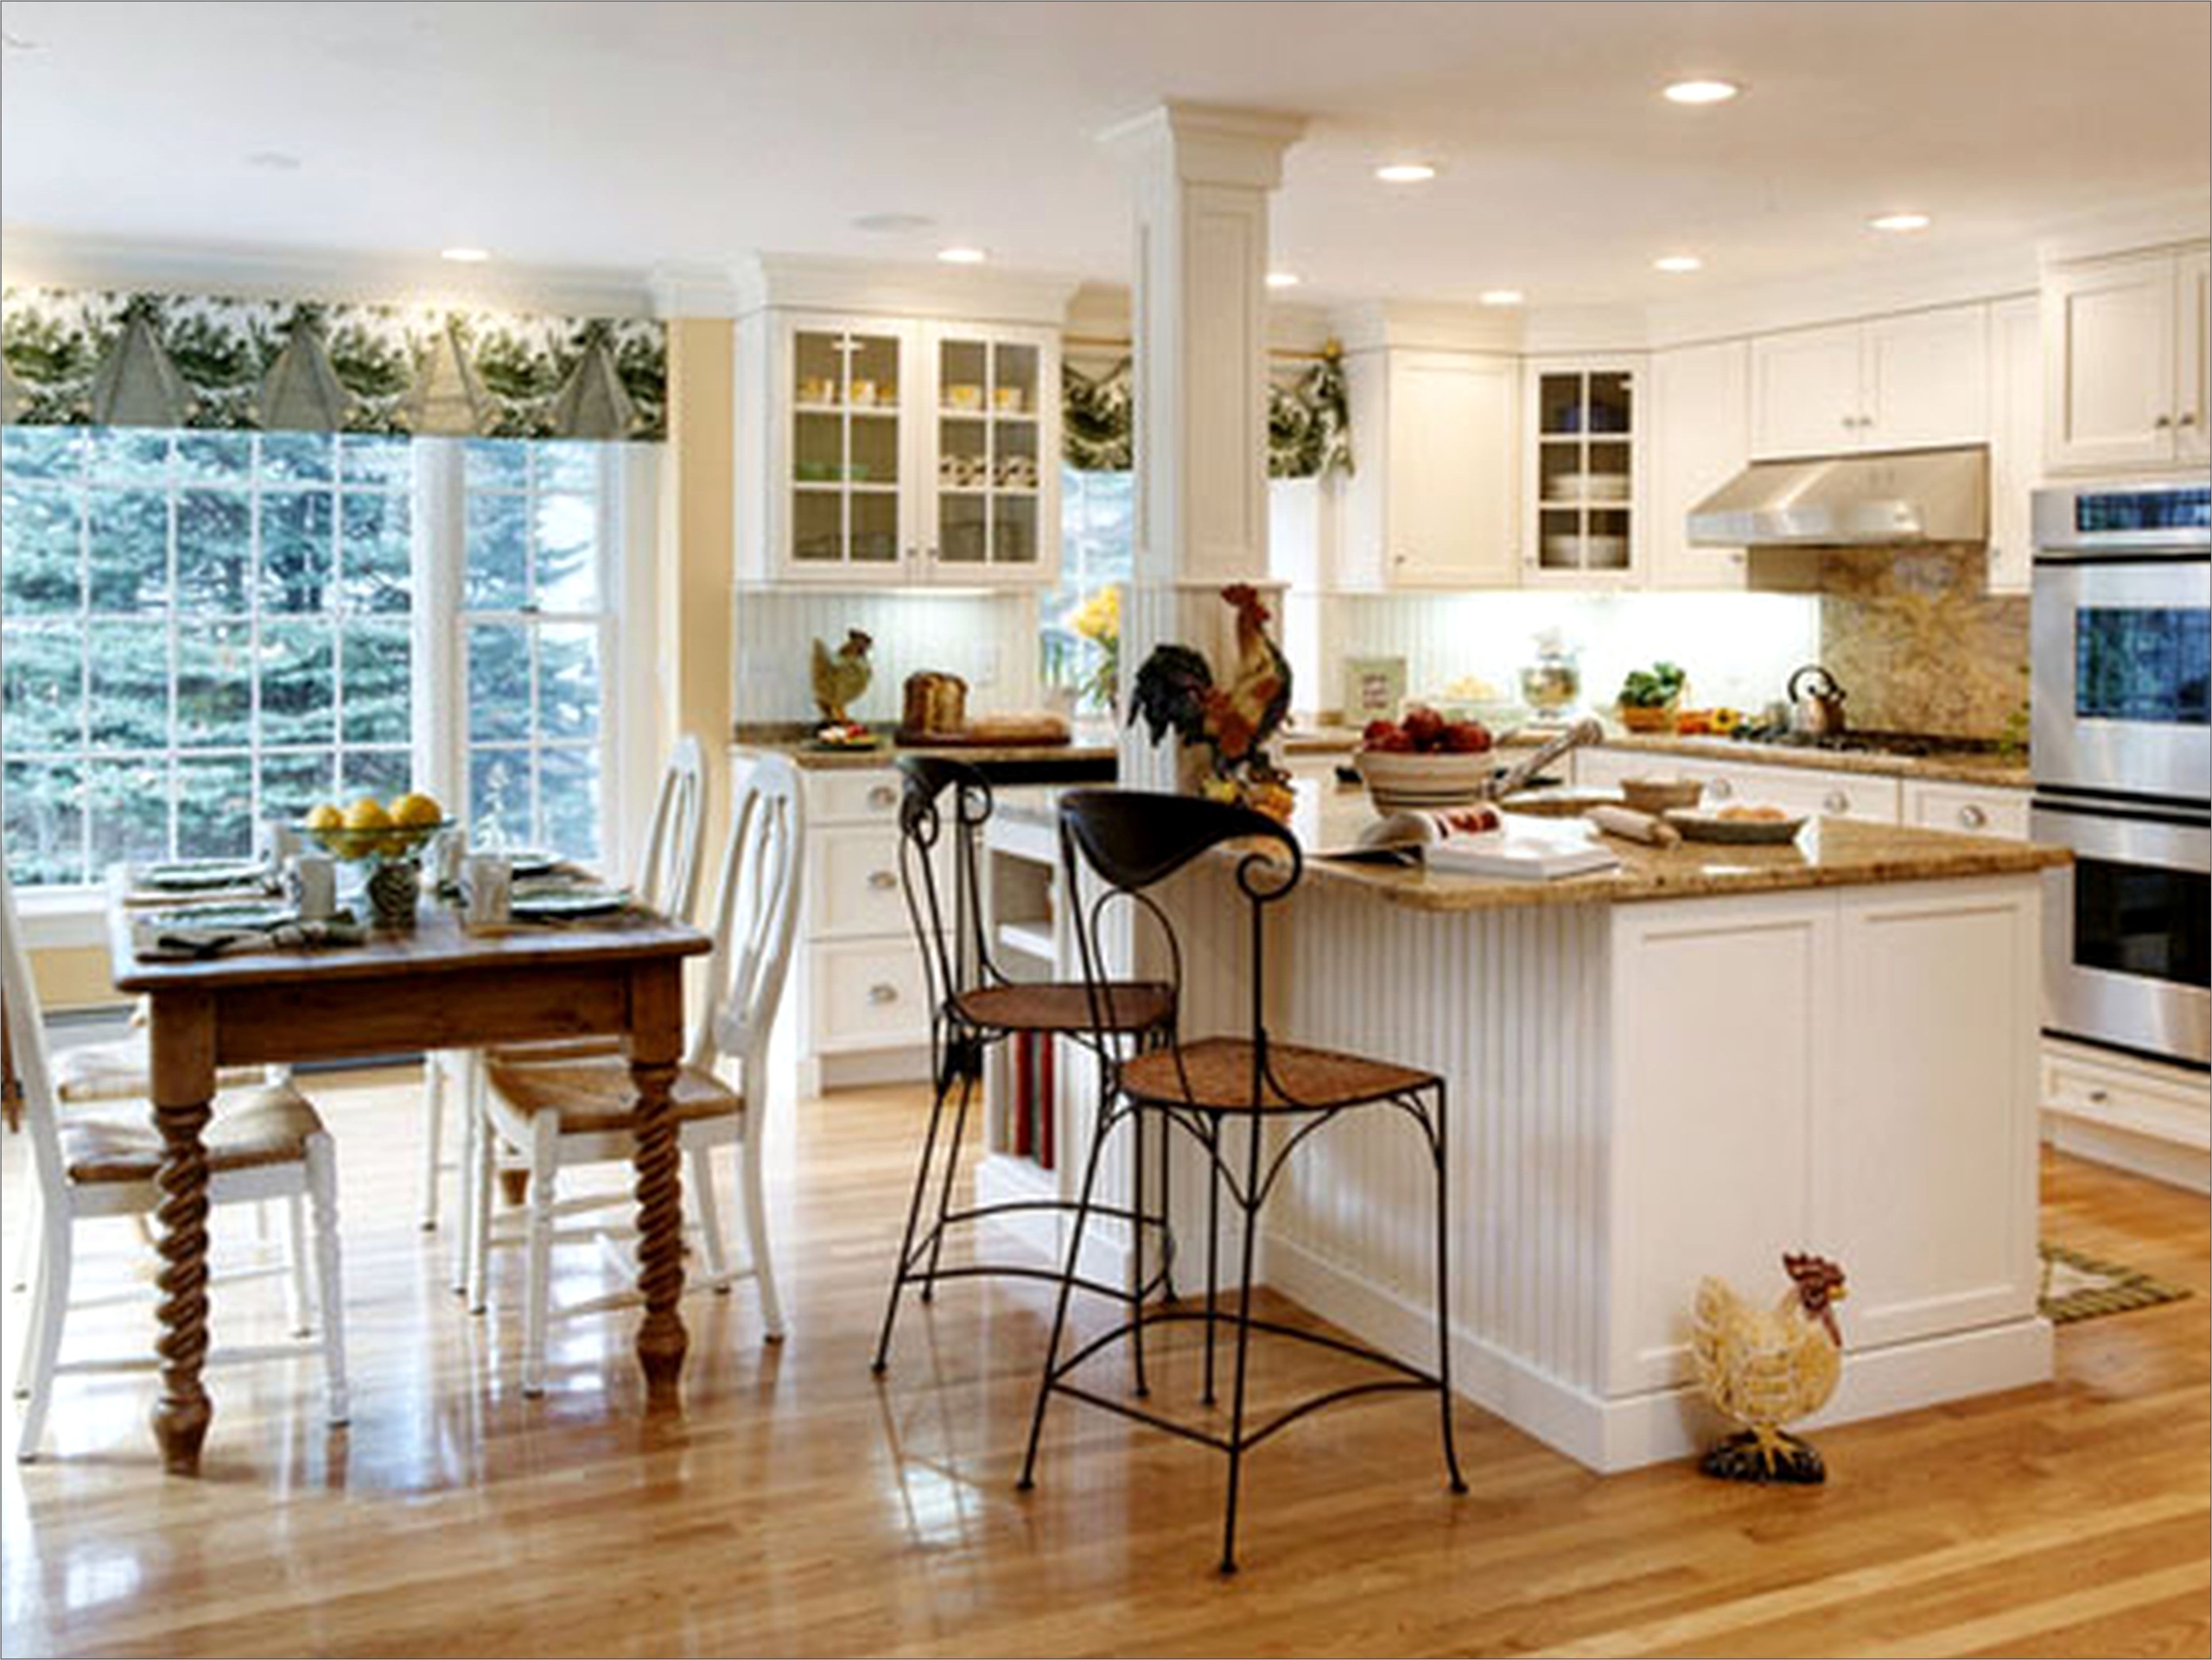 French Country Kitchen Decor Visualhunt